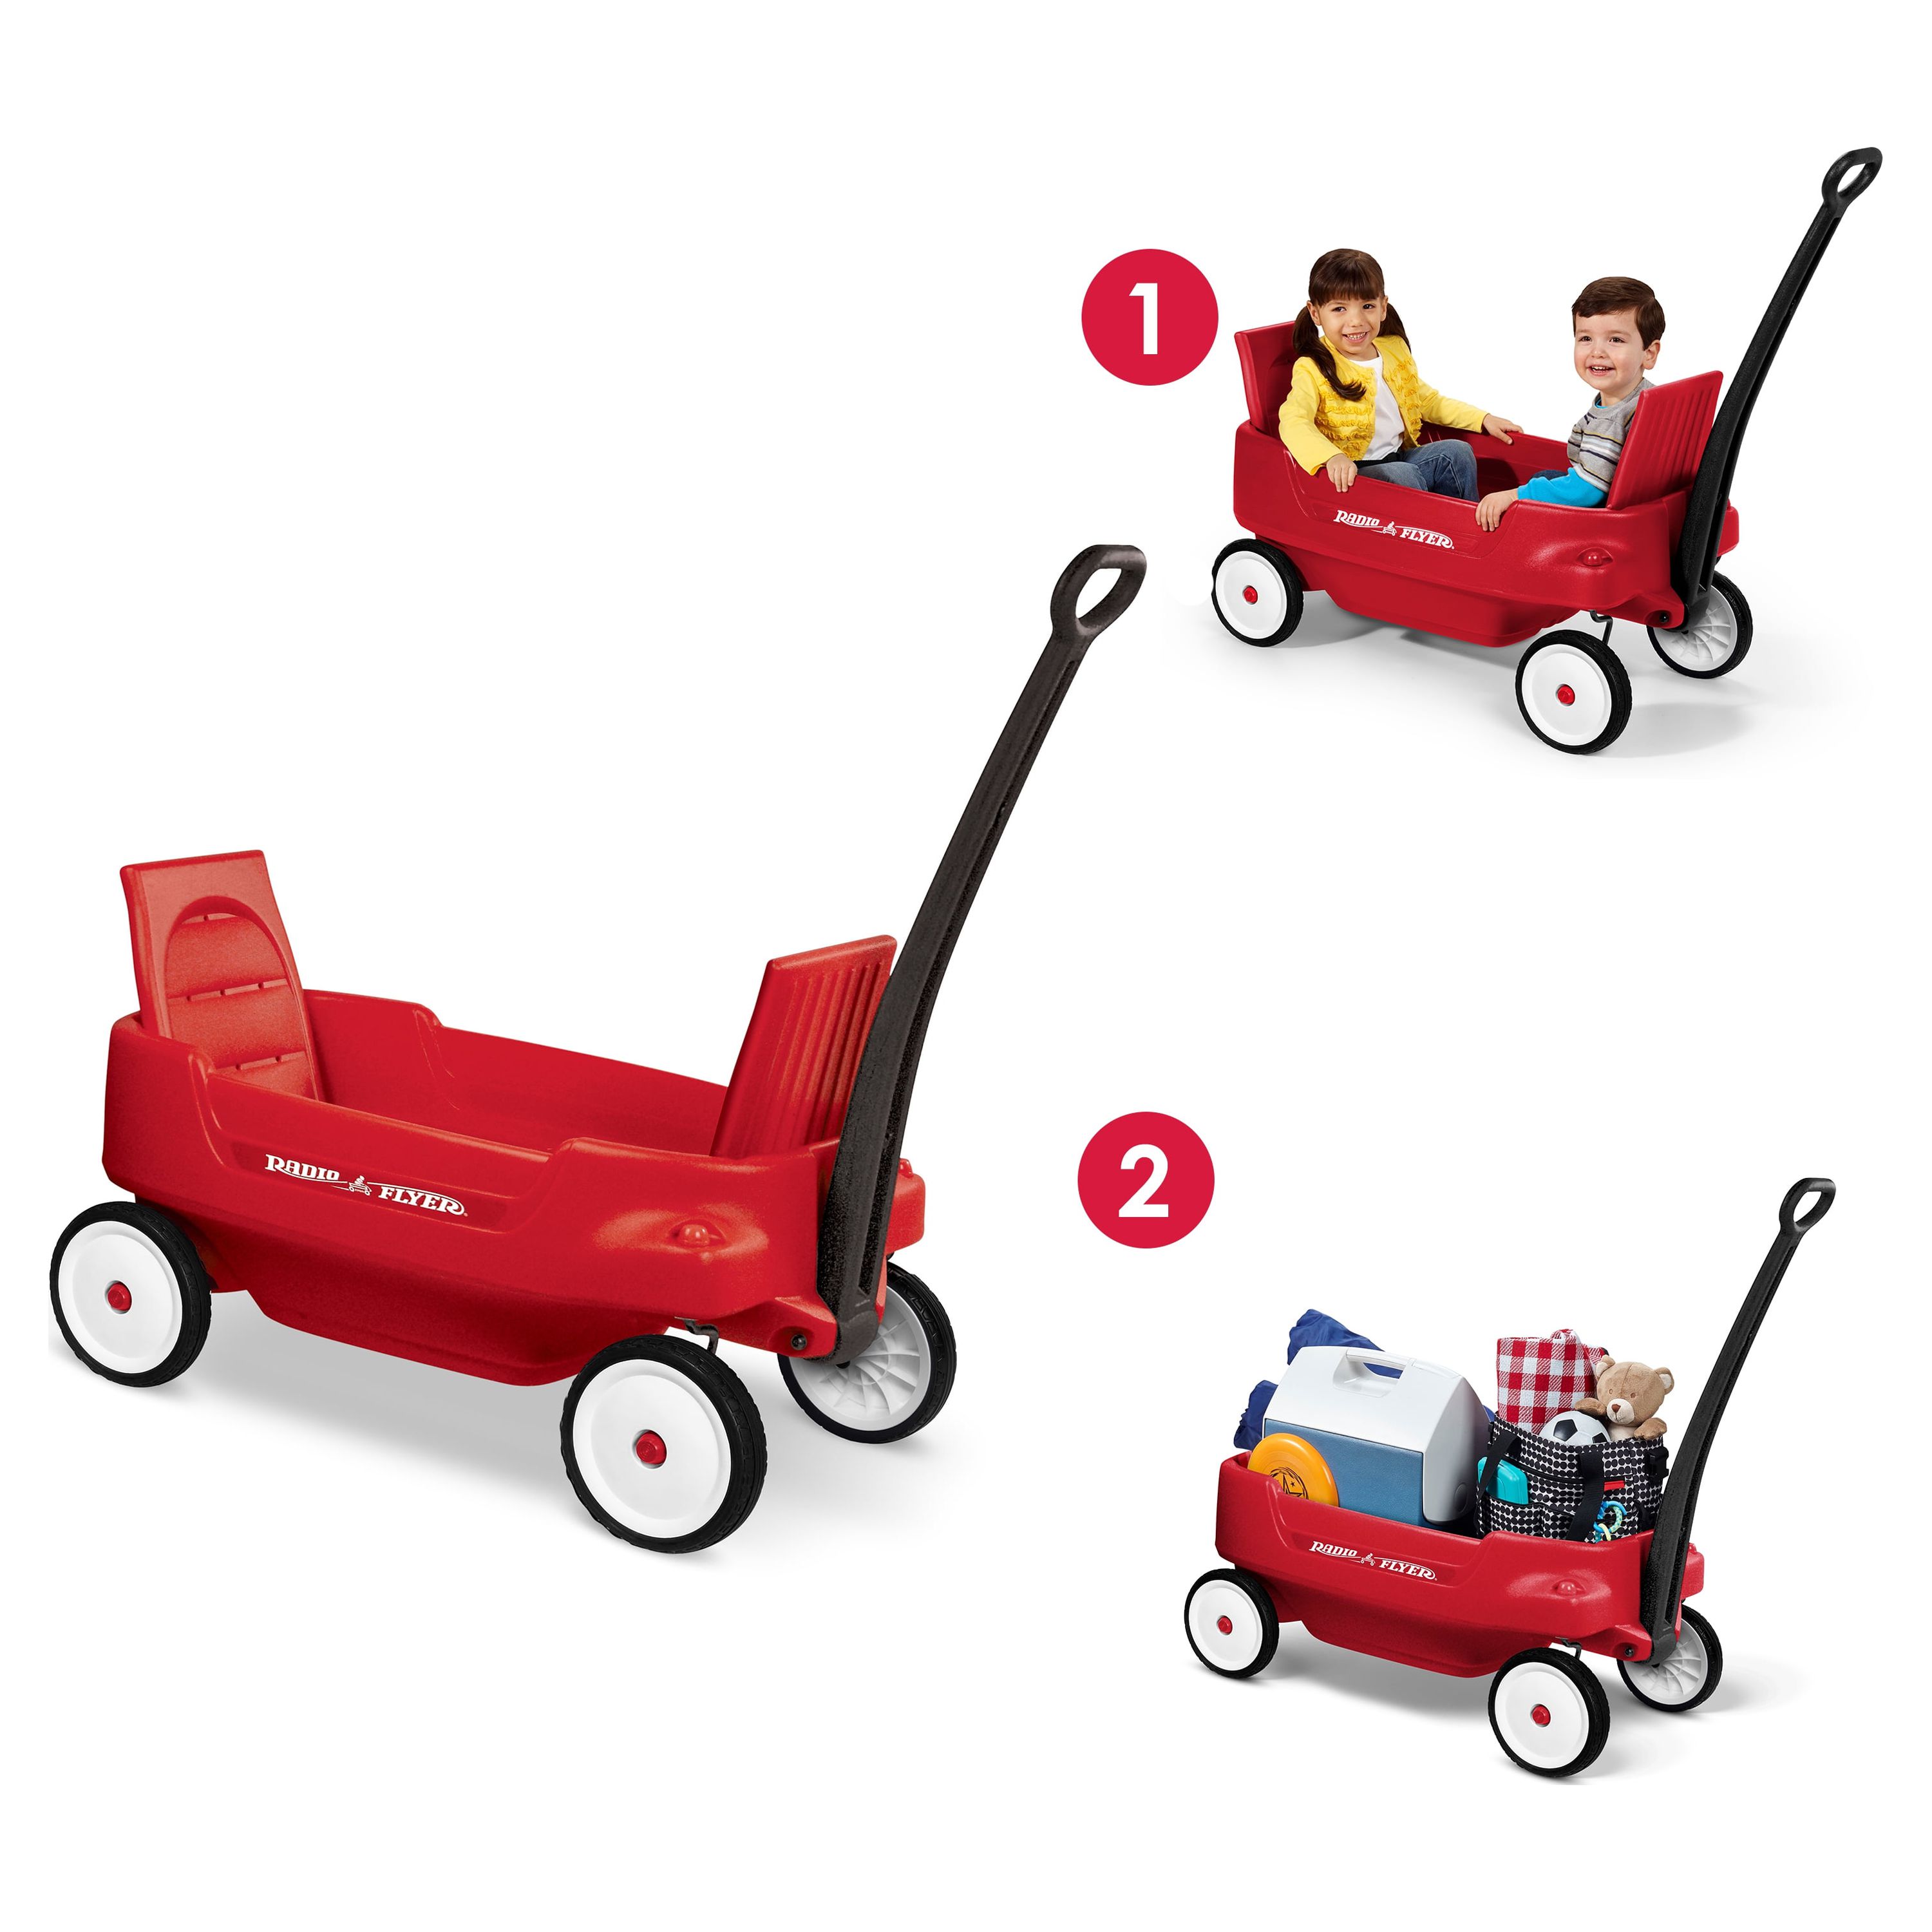 Radio Flyer, Pathfinder 2-in-1 Wagon, Folding Seats, Red - image 2 of 9